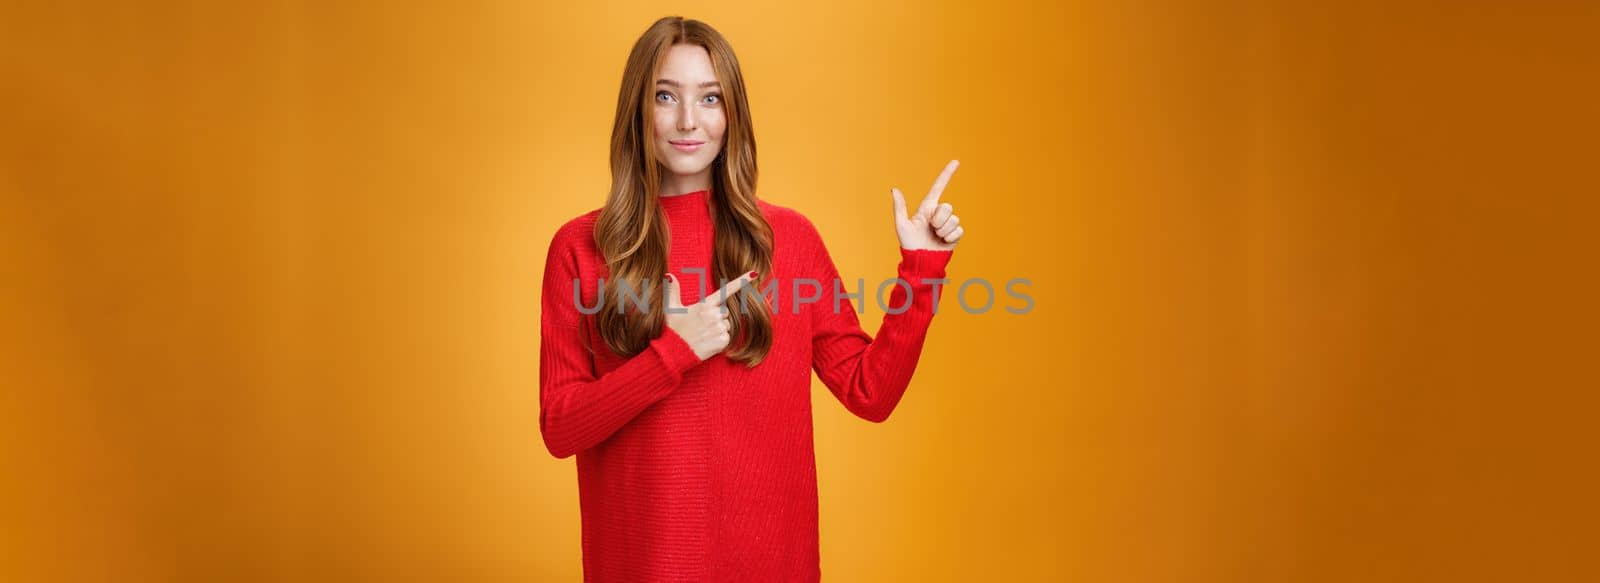 Soft and gentle gorgeous ginger girl with freckles in red warm sweater smiling joyfully pointing at upper left corner smiling showing curious place, suggesting visit it over orange background.